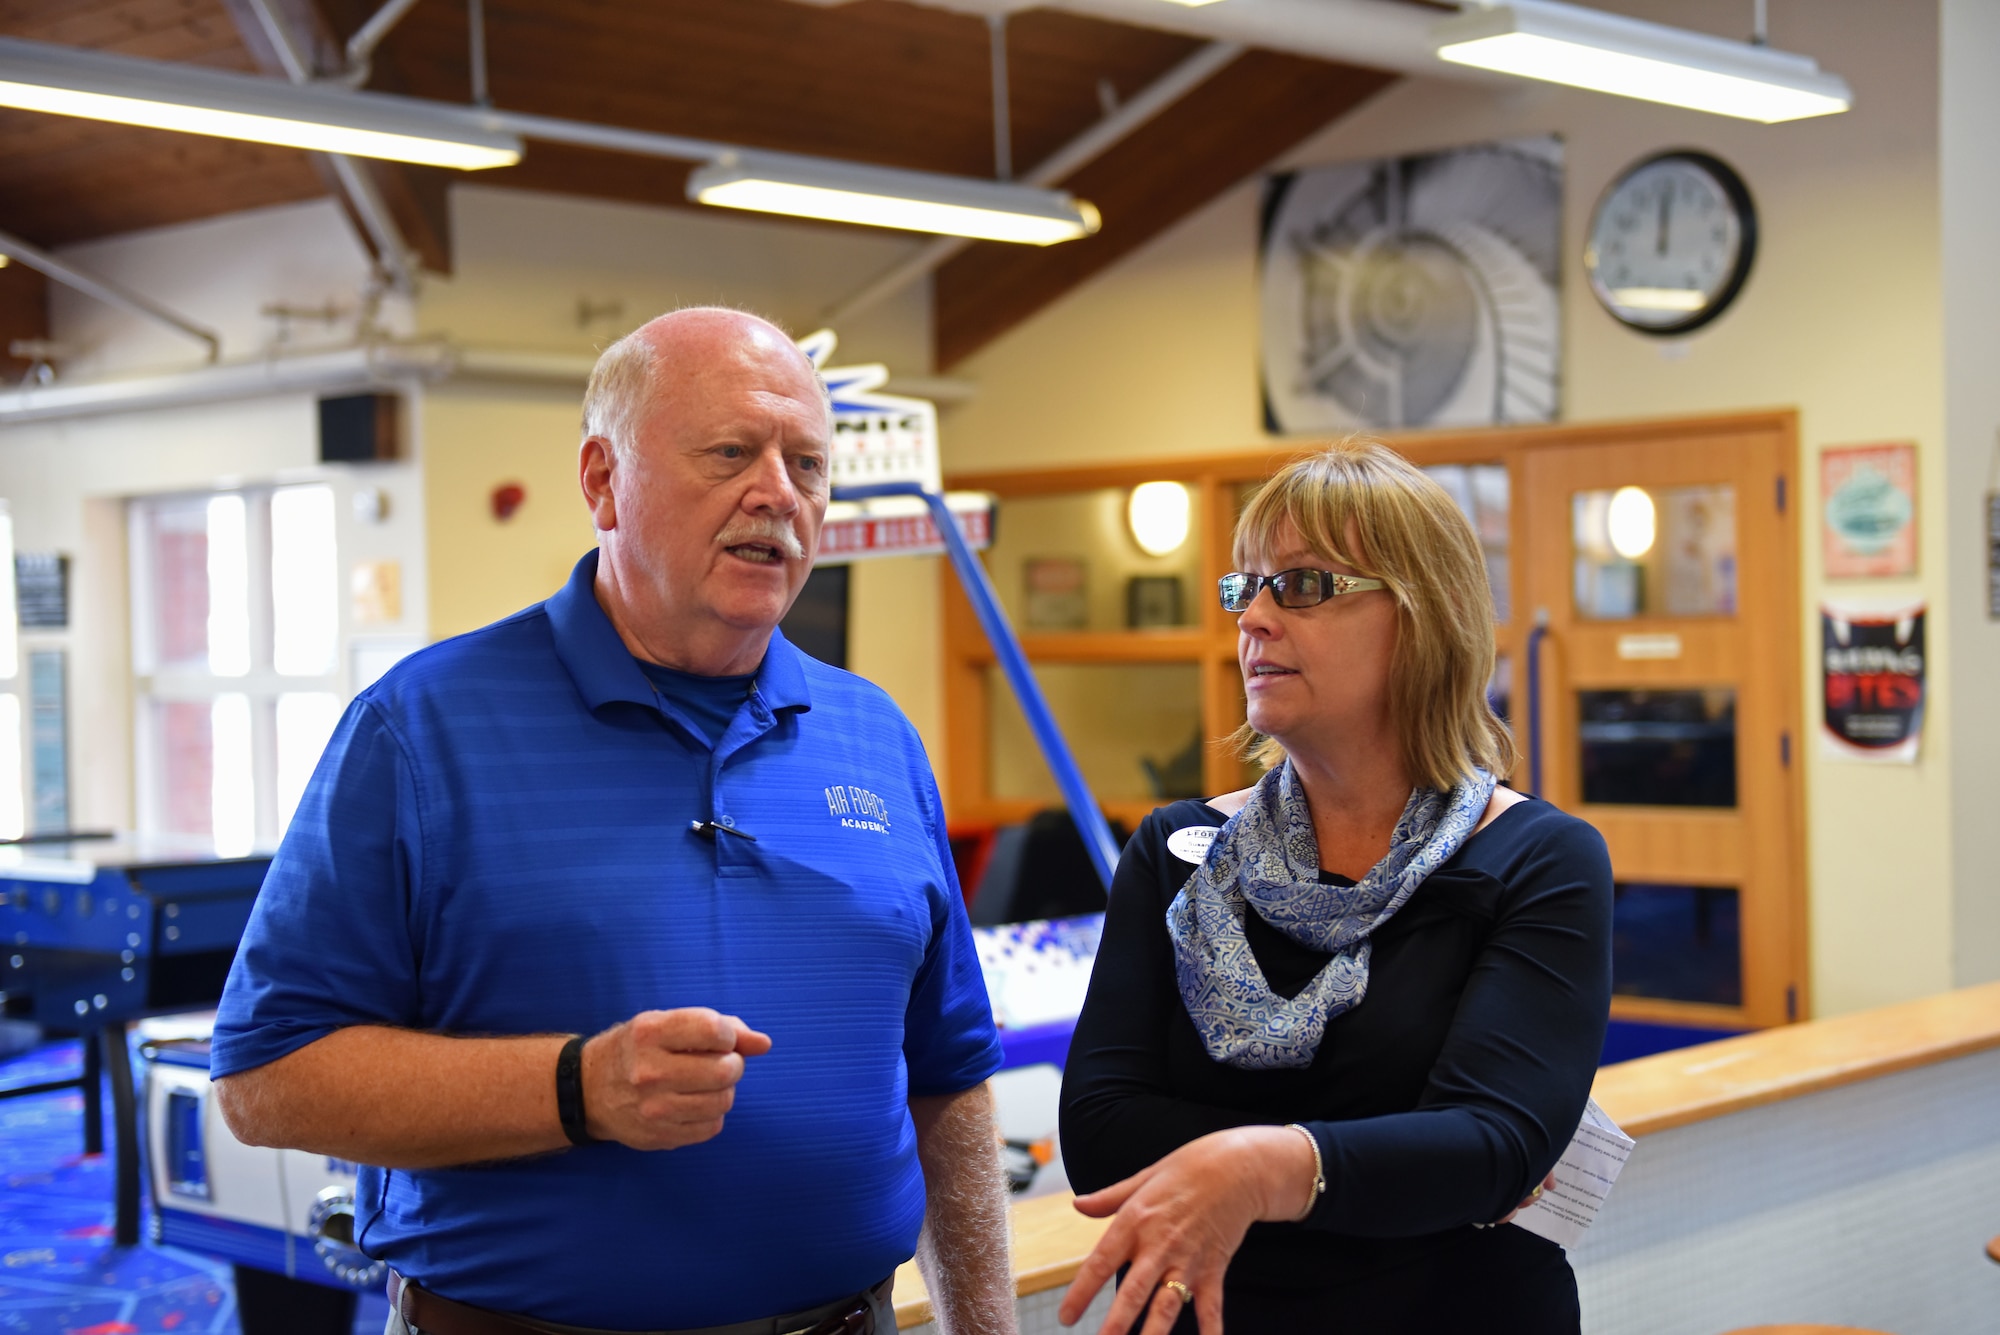 U.S. Air National Guard Col. (ret.) Jay Hone, left, talks to Susan Long 100th Force Support Squadron, Family Service Flight Chief, while visiting the Child Development Center and the Youth Center on RAF Mildenhall, England, July 12, 2018. Hone is the husband of Secretary of Air Force Heather Wilson. During his time at RAF Mildenhall he met with Airmen and visited different support agencies on base for Airmen and their families. (U.S. Air Force photo by Senior Airman Luke Milano)